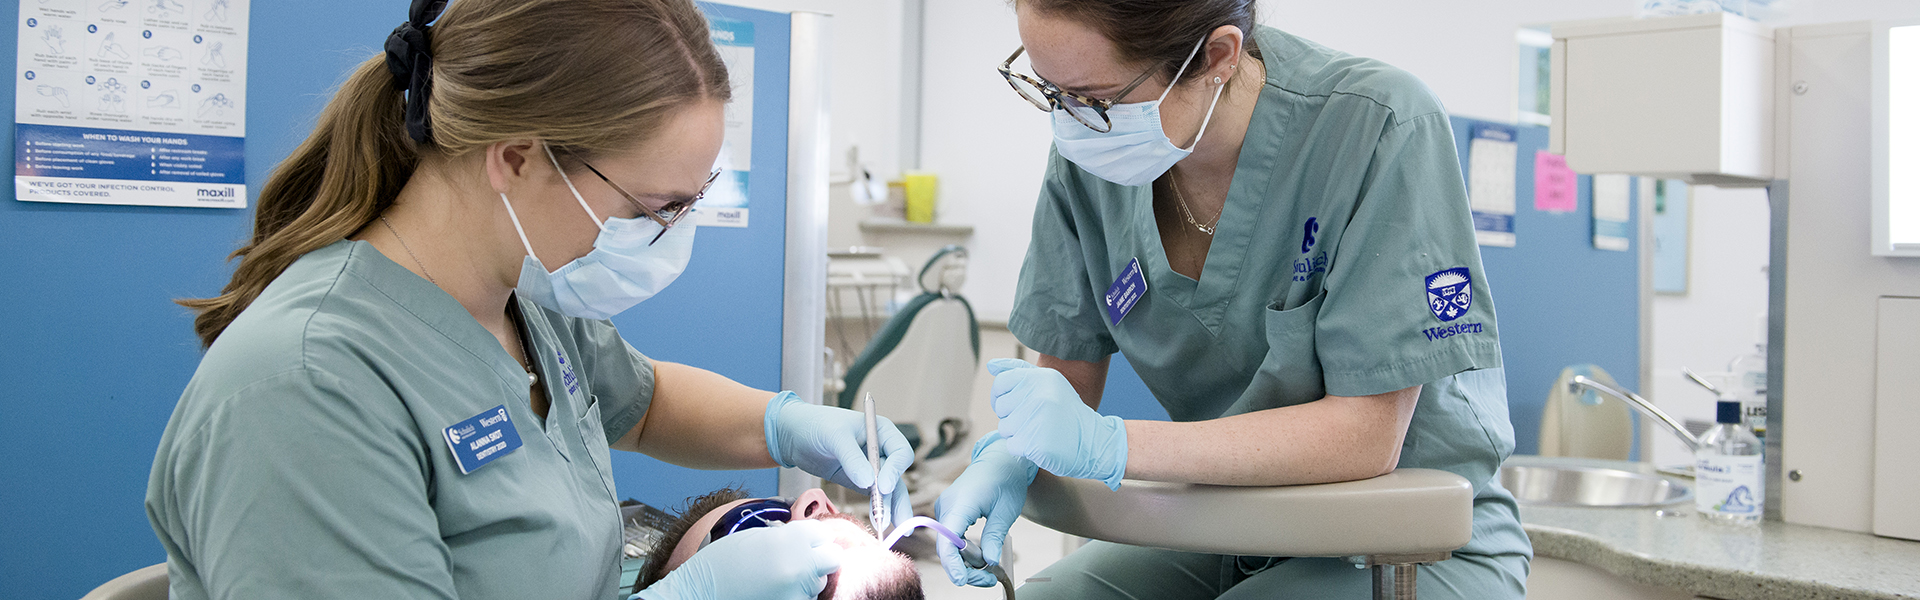 Schulich Dentistry’s new clinic model is reshaping clinical learning 